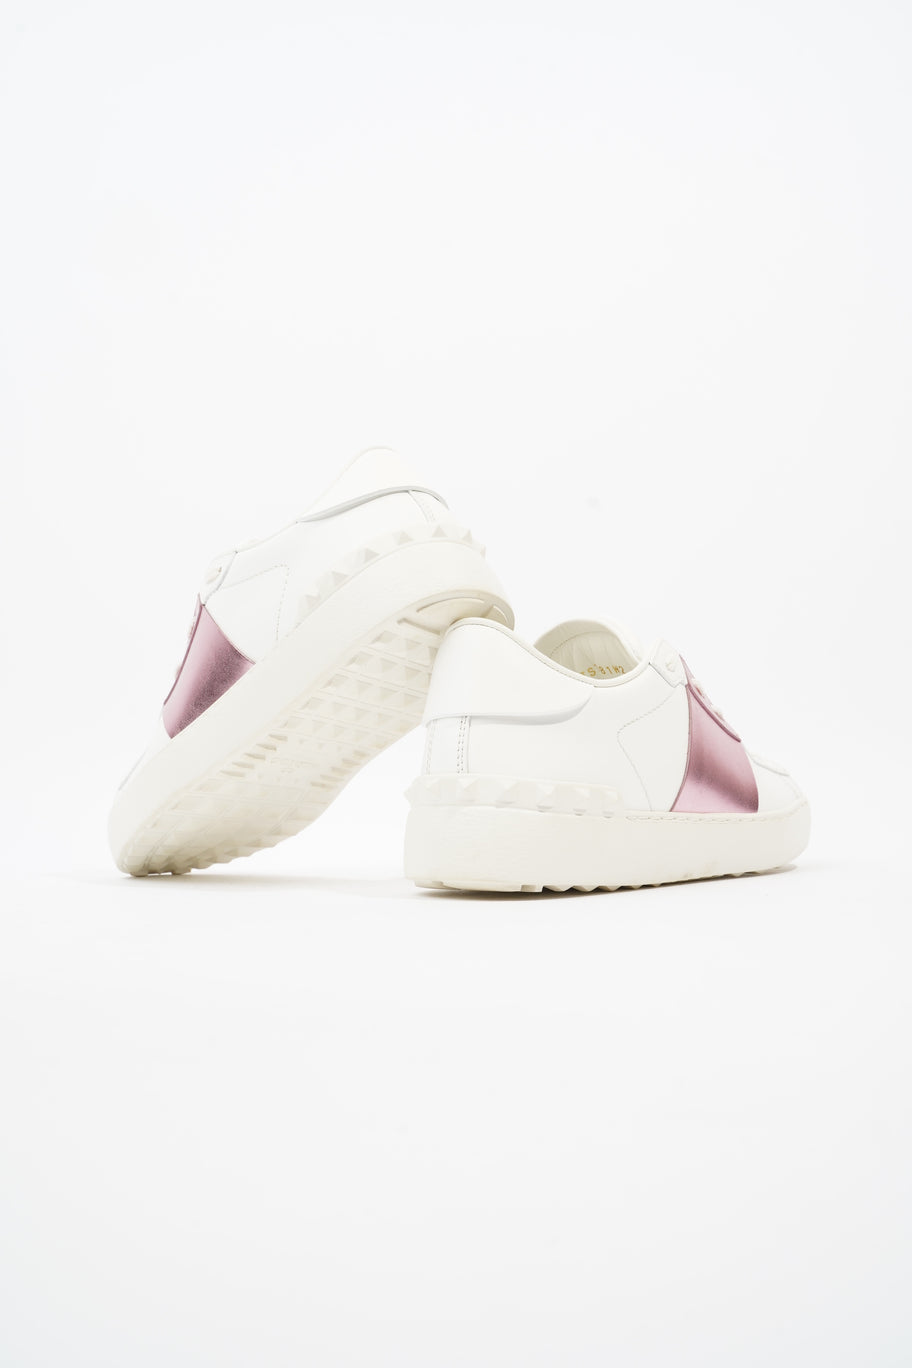 Open Sneakers White / Pink Leather EU 37.5 UK 4.5 Image 10